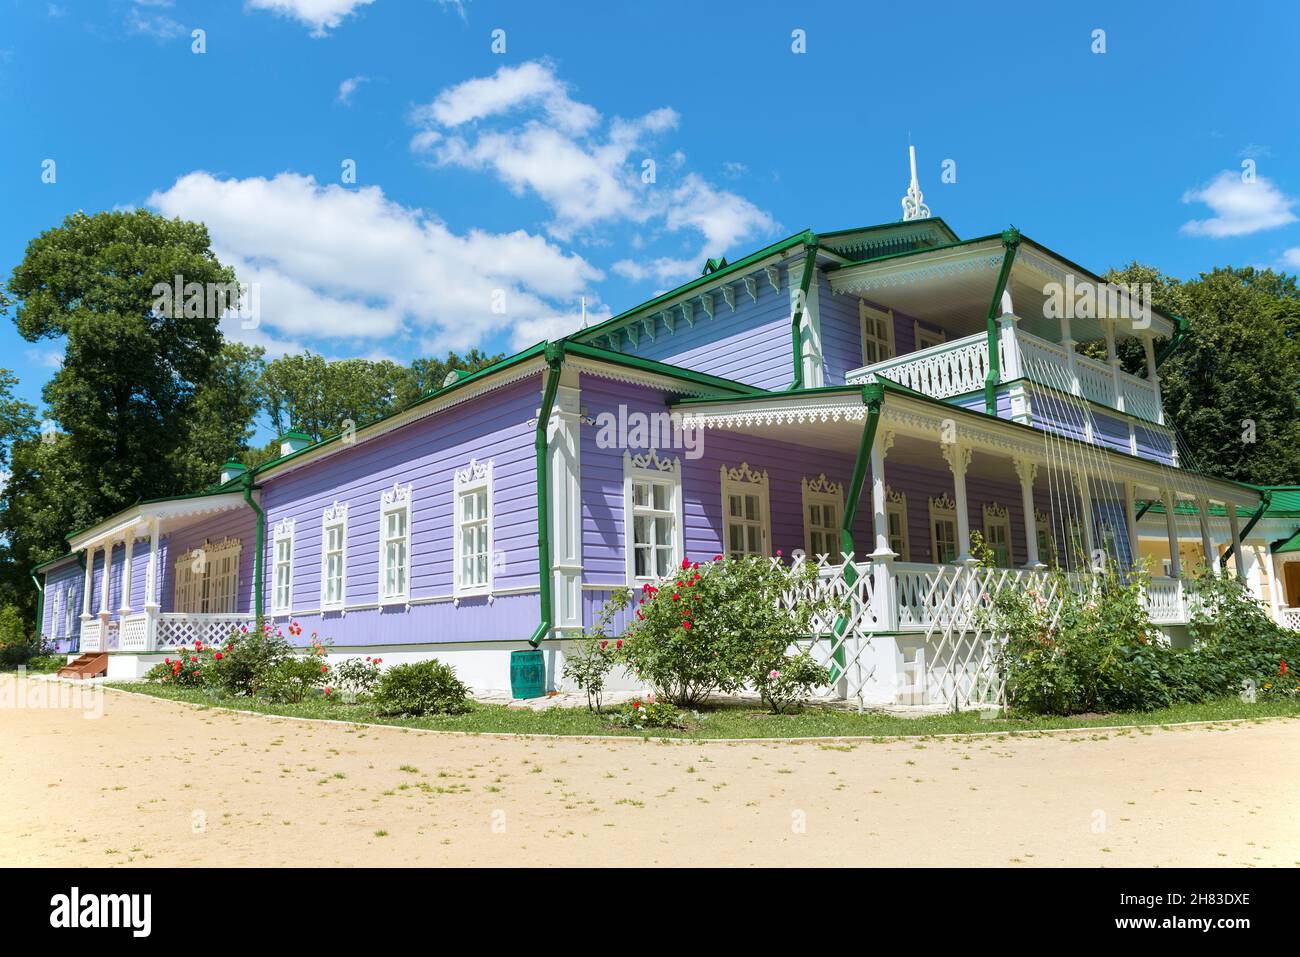 ORYOL REGION, RUSSIA - JULY 06, 2019: The main manor house in the estate 'Spasskoye-Lutovinovo' on a sunny July day. The estate of the mother of the c Stock Photo